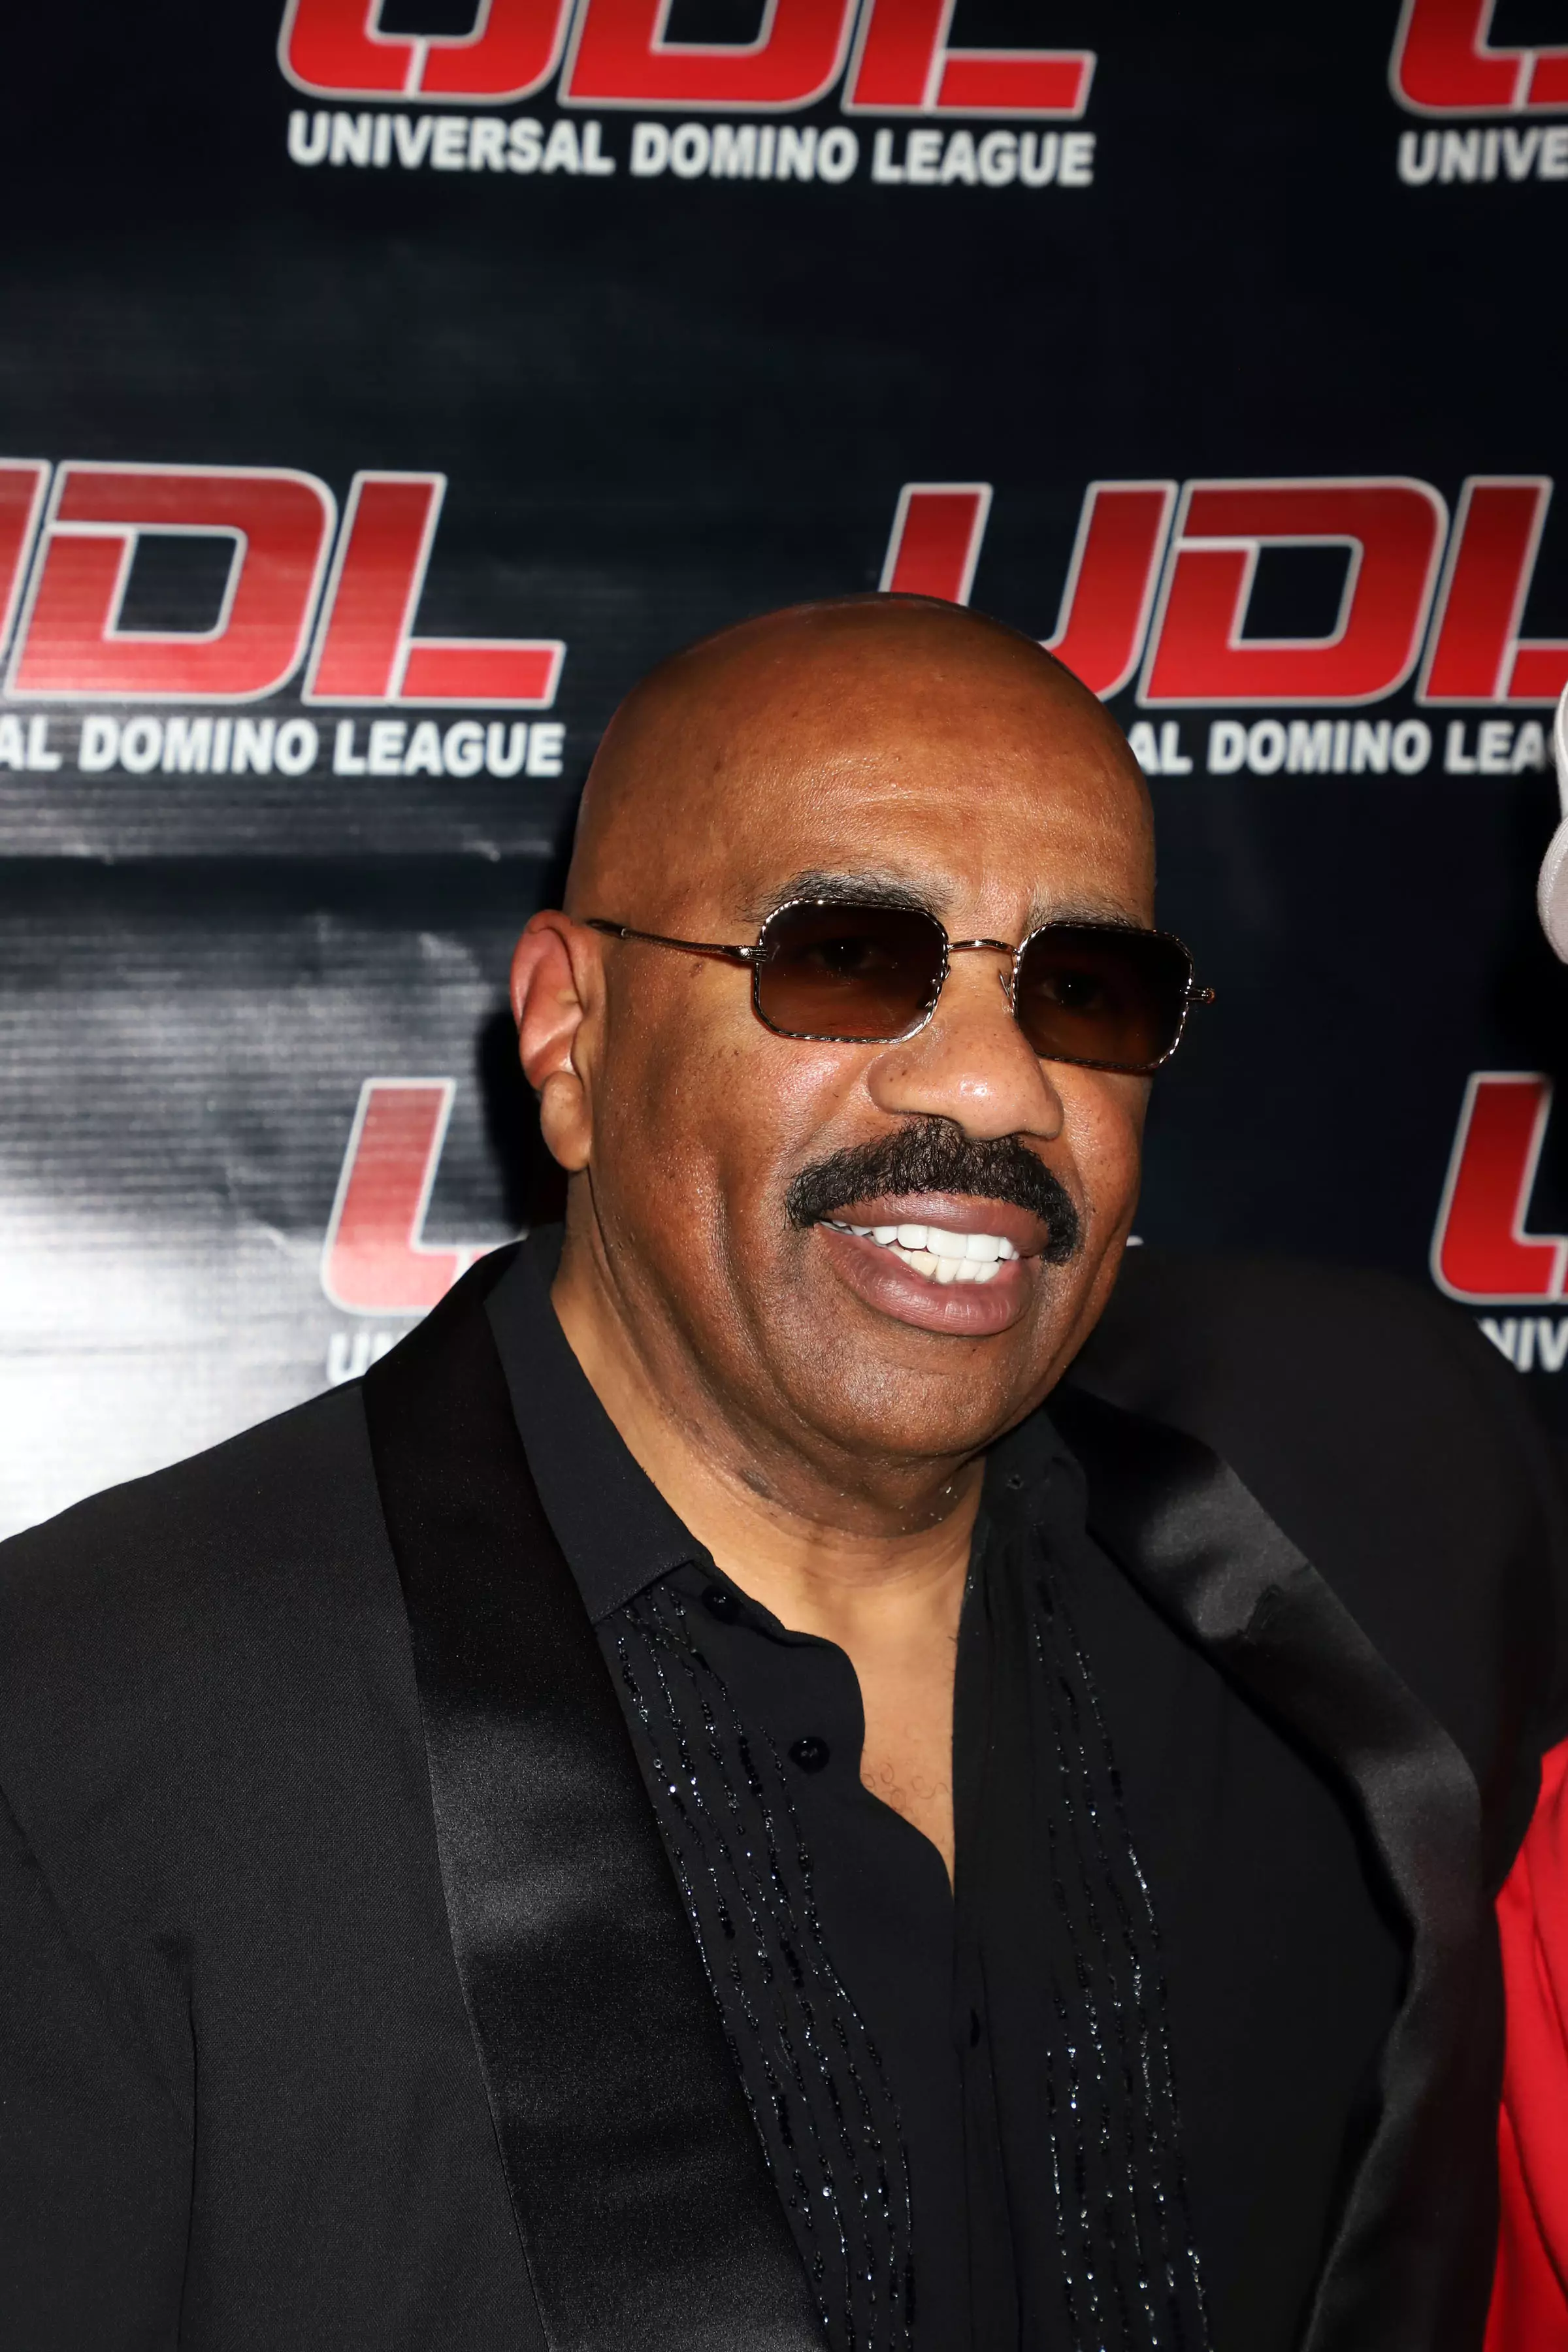 Steve Harvey says people should just accept going bald.